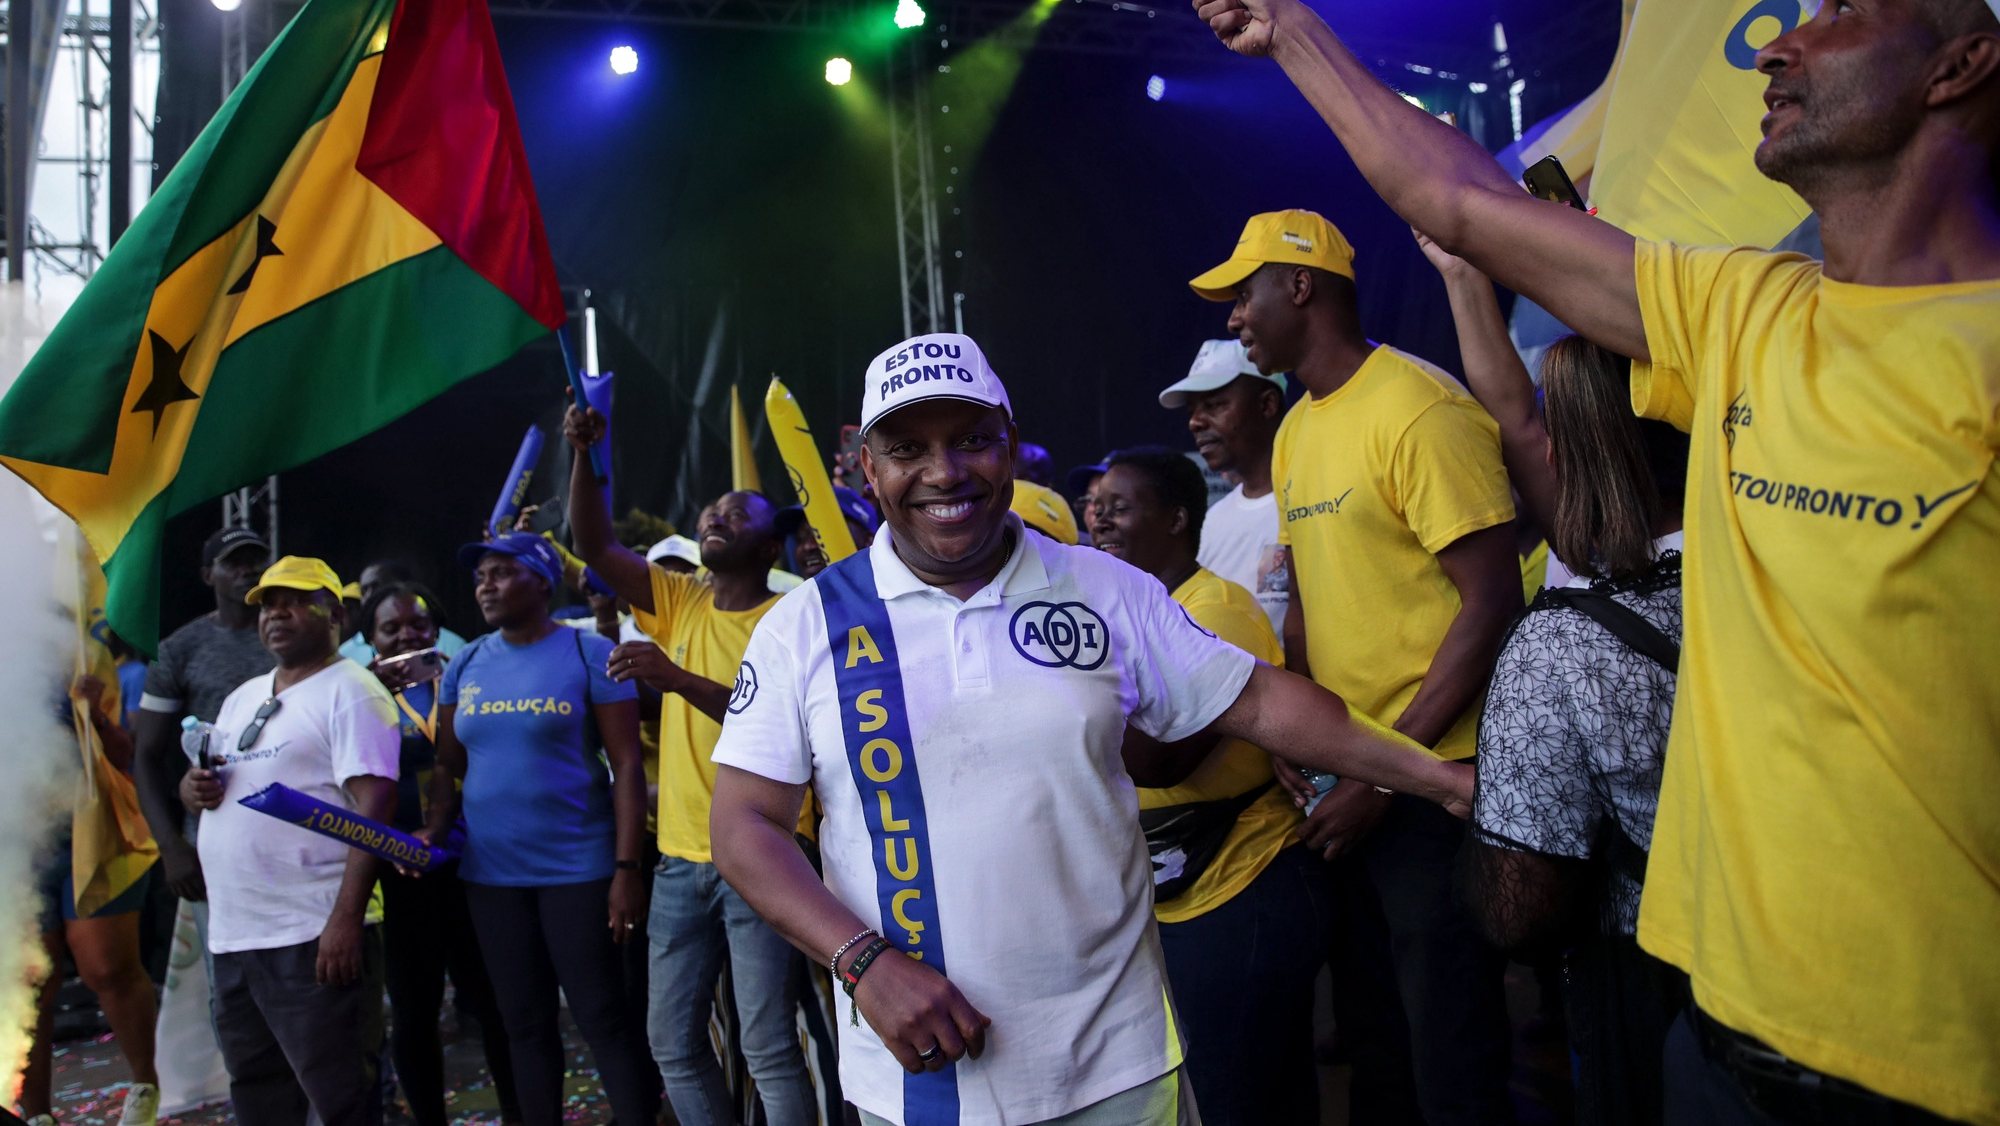 The former prime minister of São Tomé and Principe, Patrice Trovoada, leader of the main opposition party (ADI) during a rally after his arrival in the country today, after four years of absence, where he was welcomed by thousands of euphoric supporters, to participate in the final stretch of the electoral campaign for the legislative elections 18 September 2022. São Tomé and Principe goes to the polls for the legislative elections on the 25th september 2022. ESTELA SILVA/LUSA